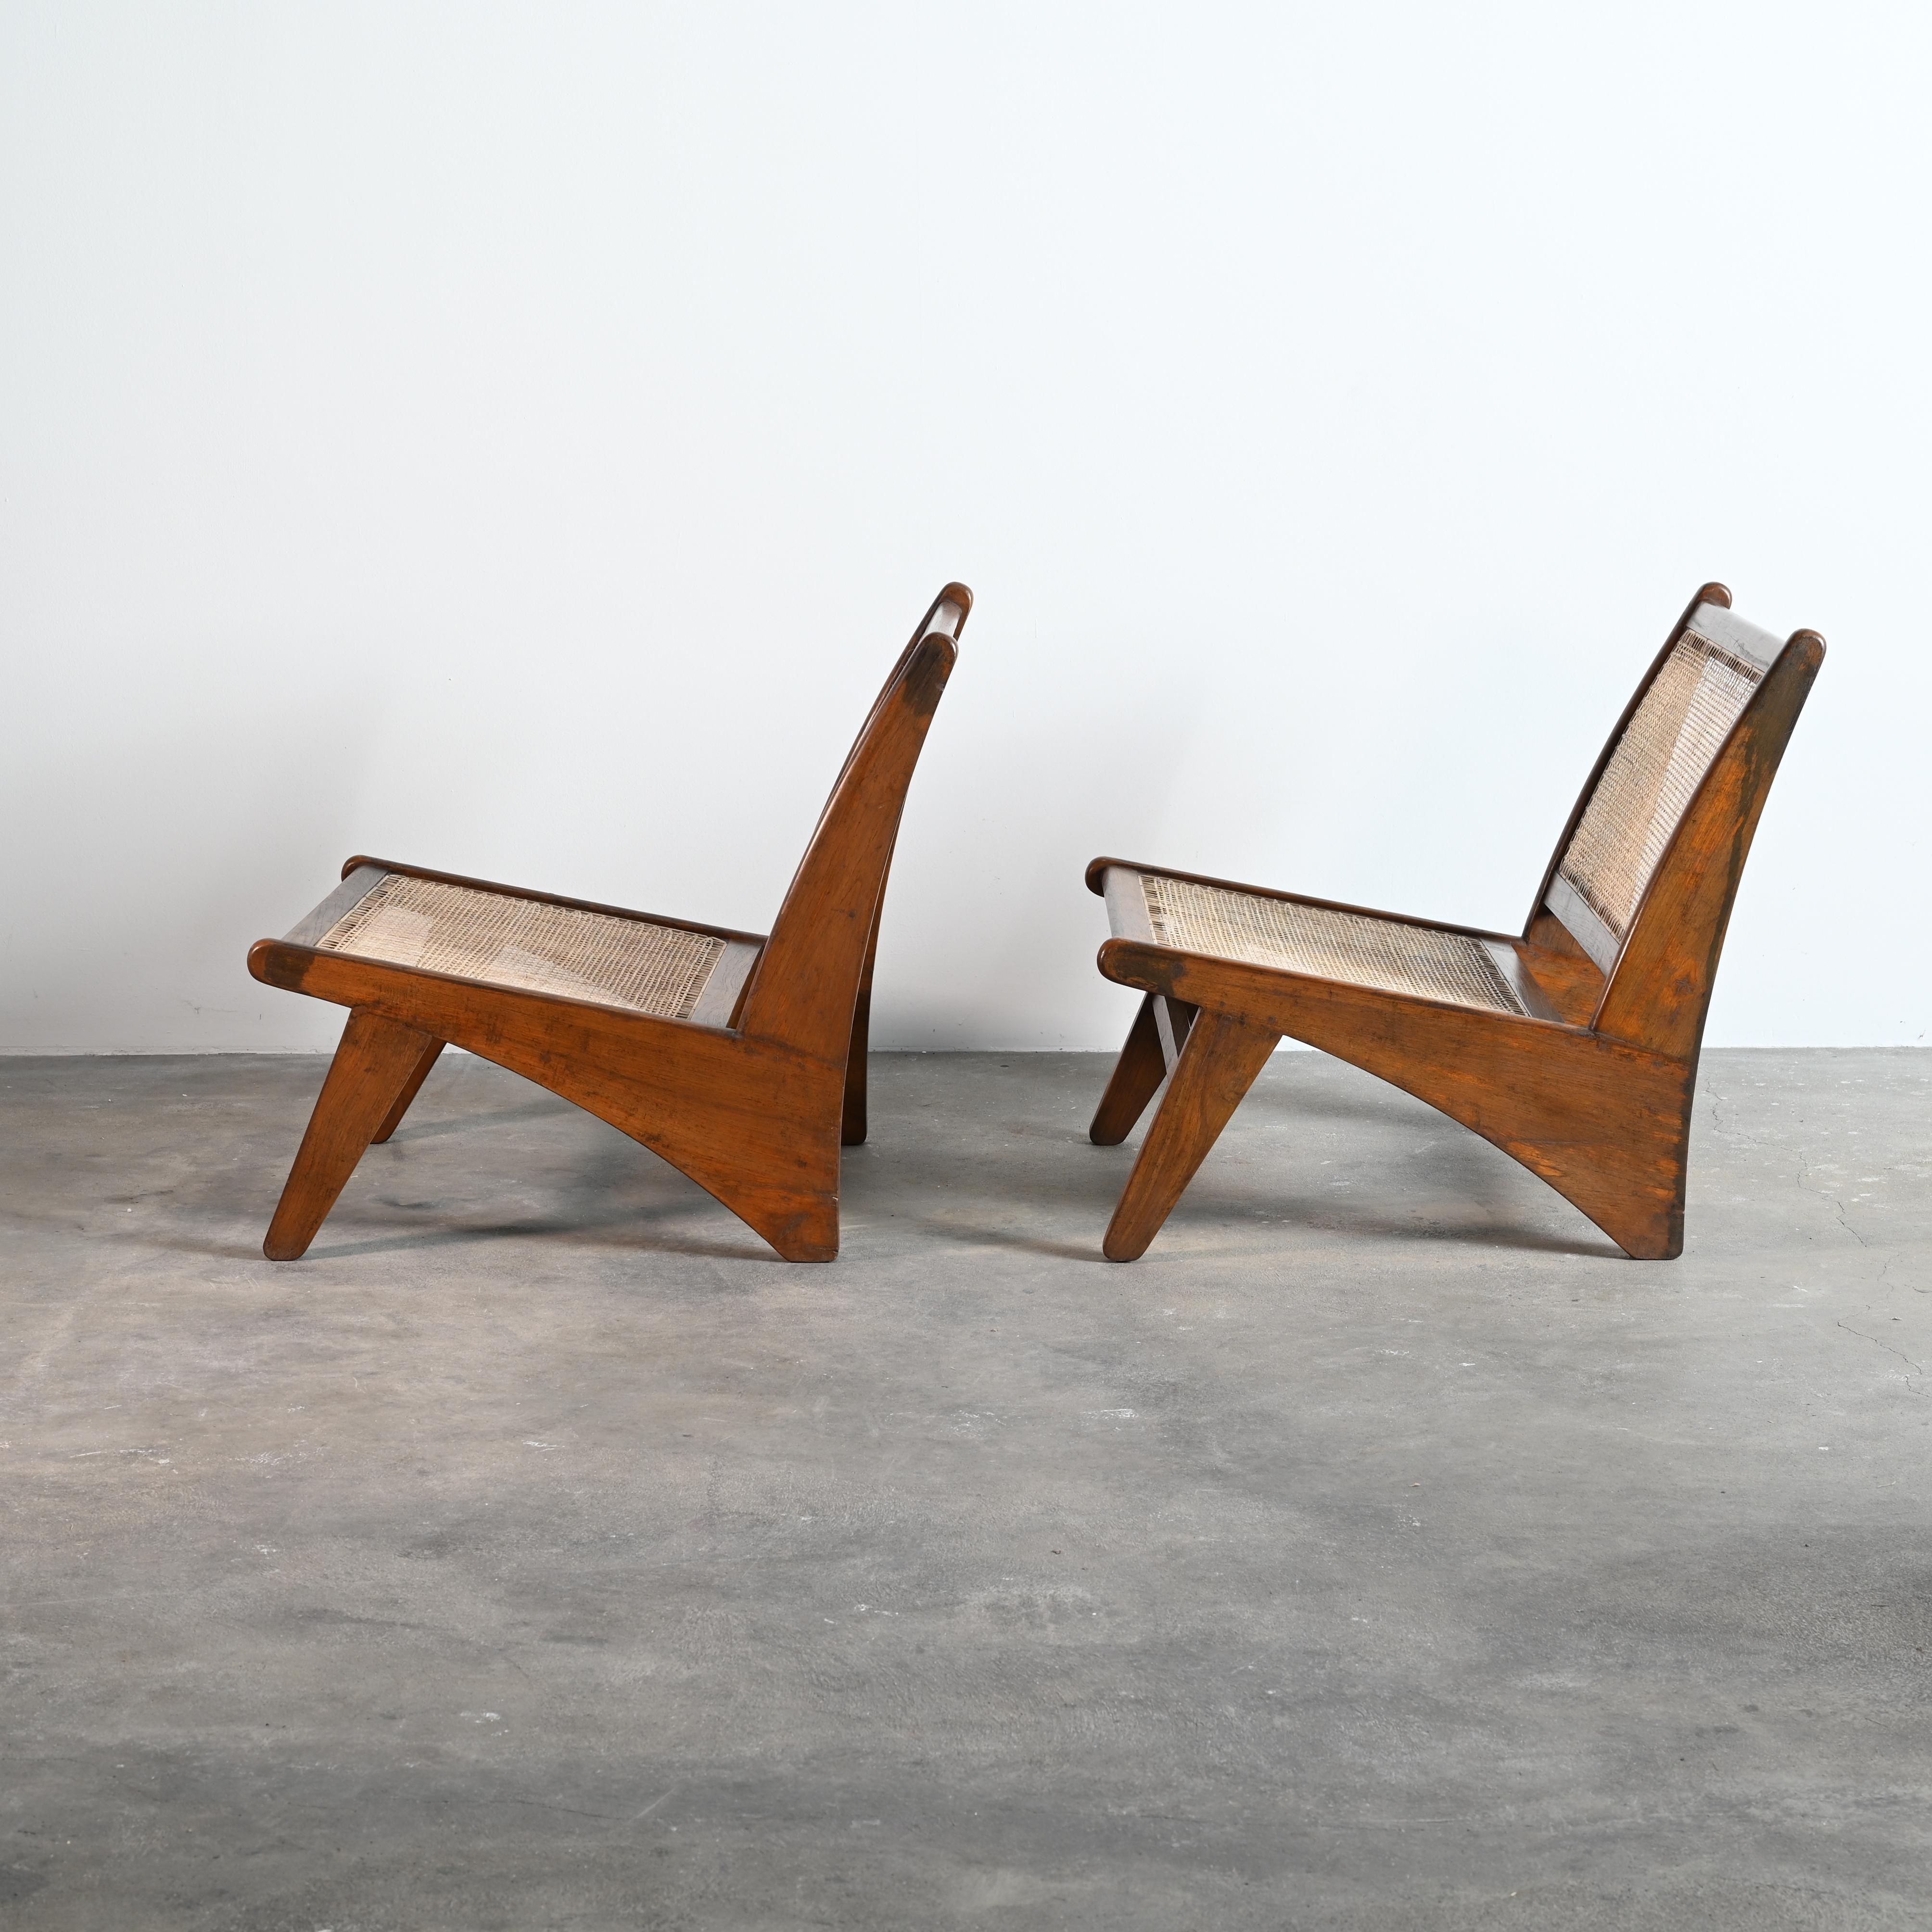 20th Century Pierre Jeanneret PJ-SI-60-A Pair of Lounge Chairs / Authentic Mid-Century Modern For Sale